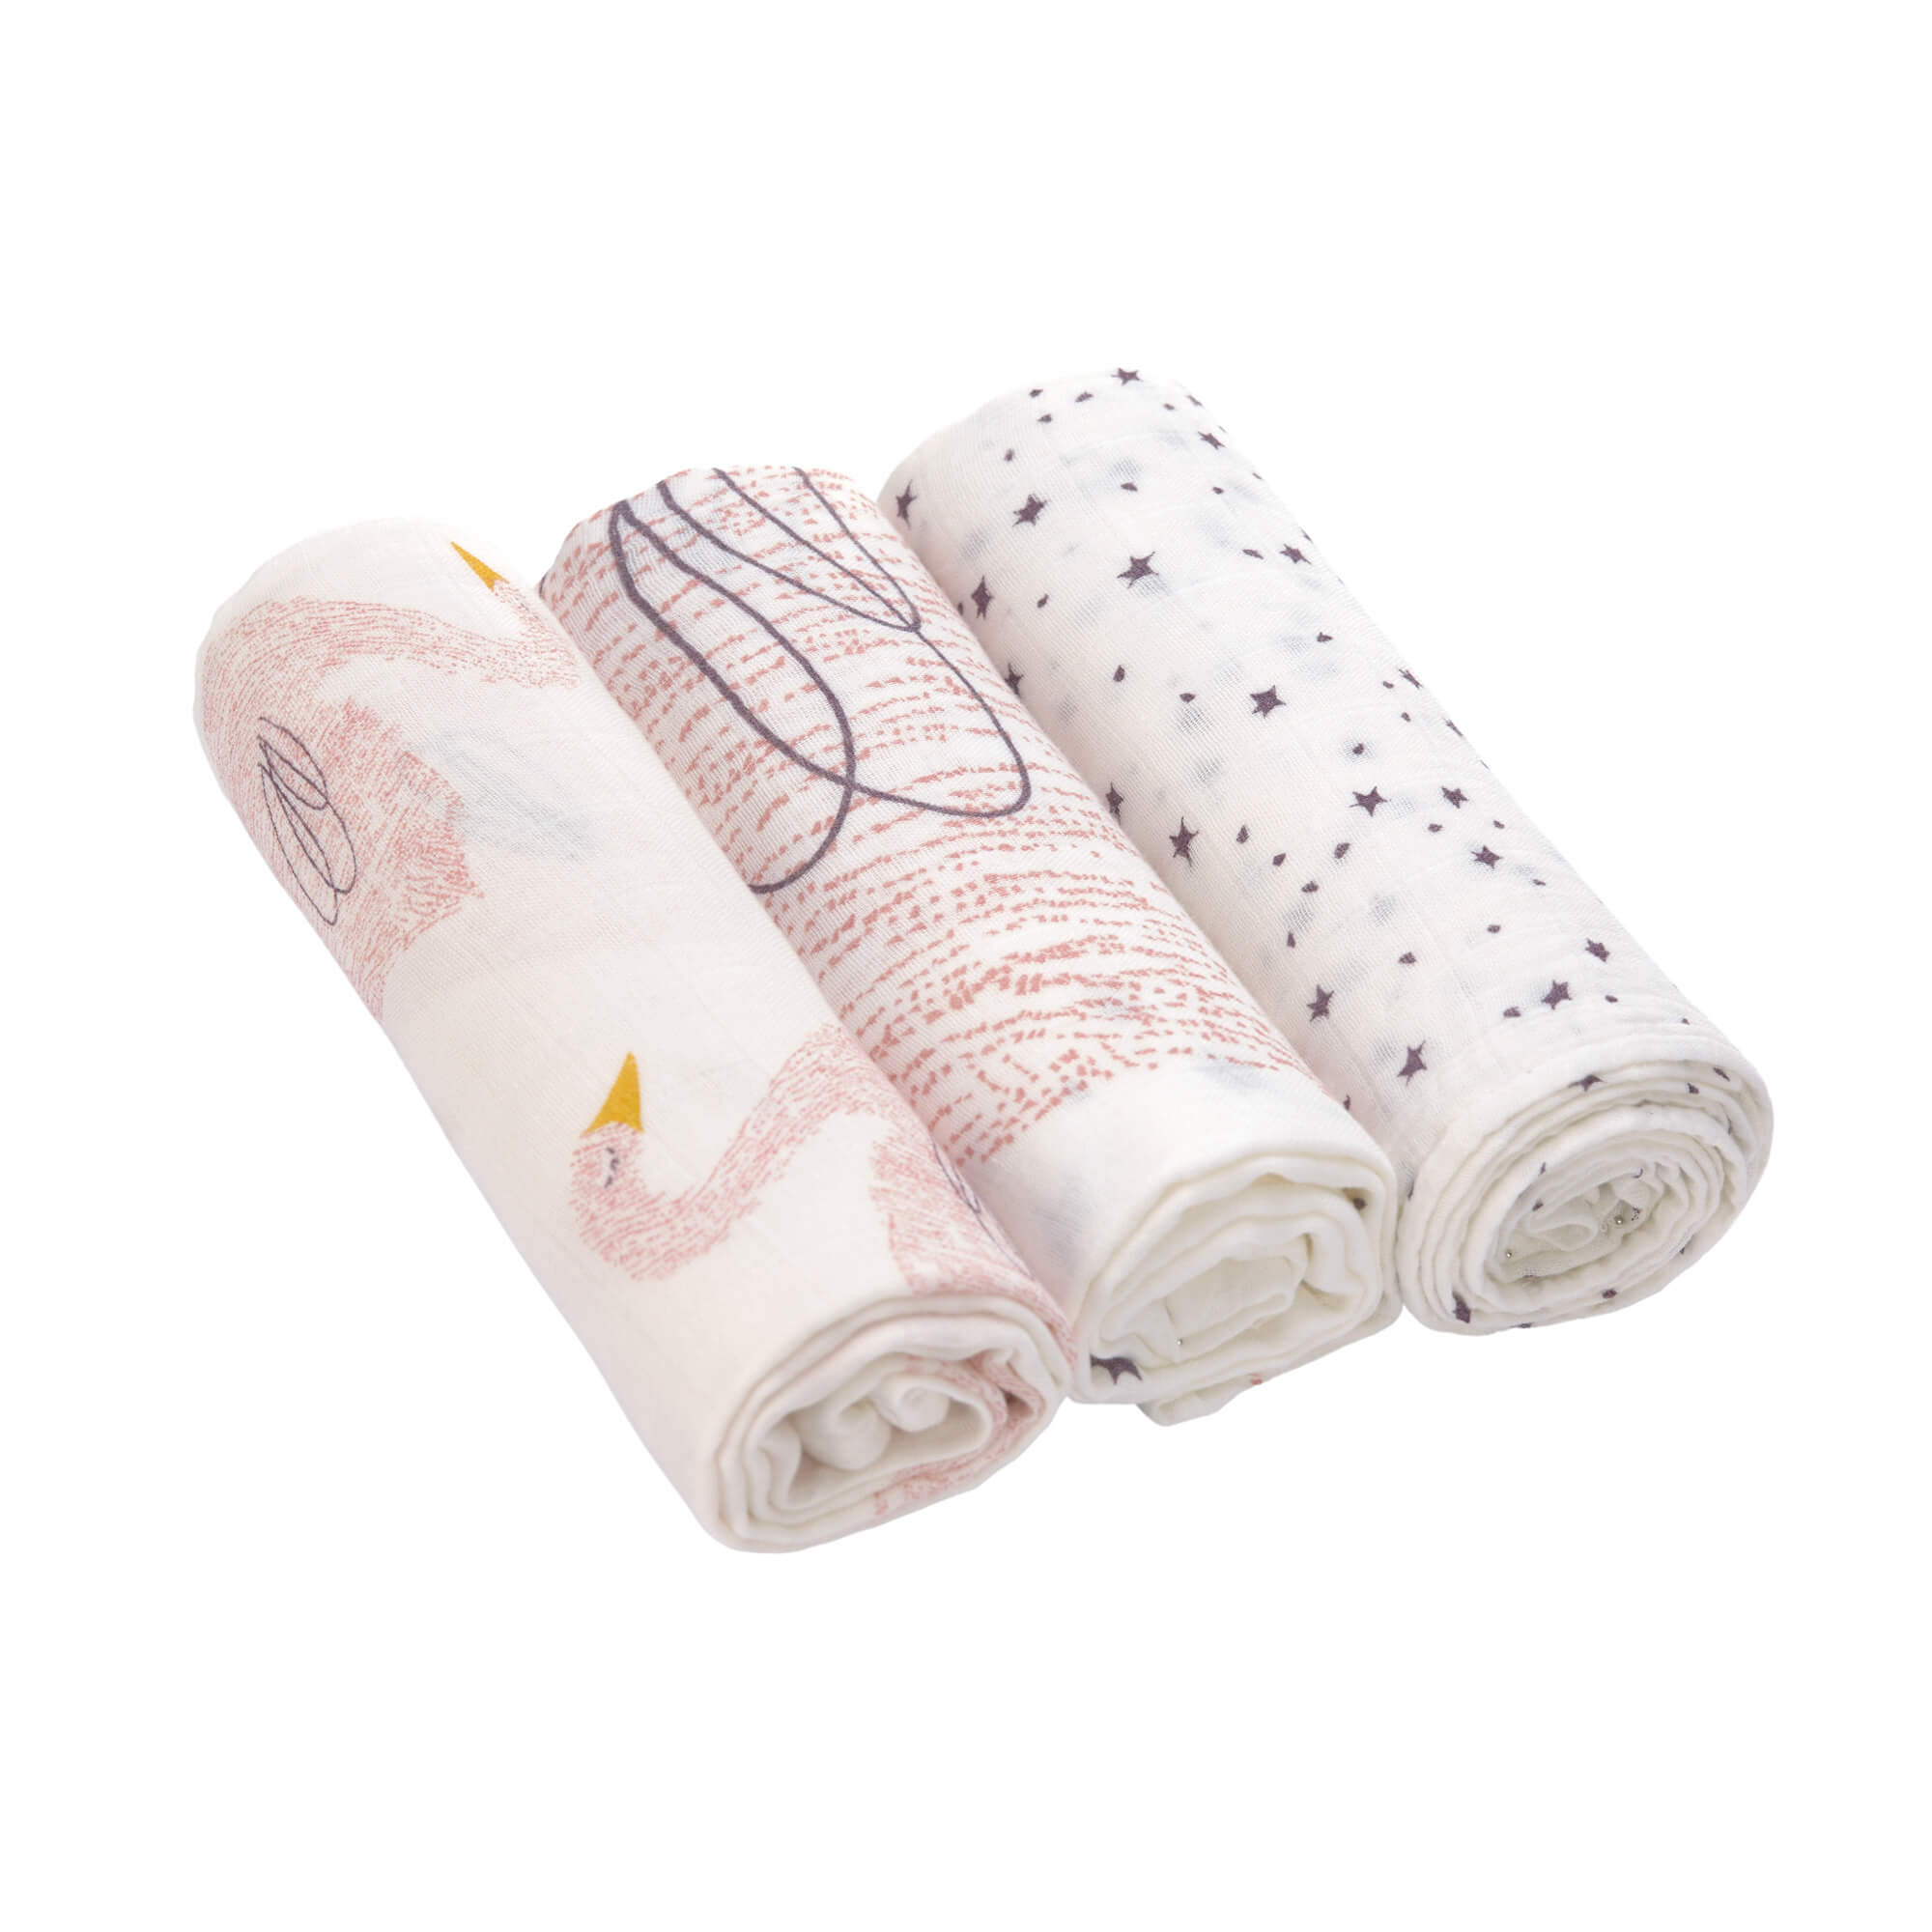 Lässig - Large Bamboo Swaddle Cloths, 3 pc - Little Water Swan (291312001741)